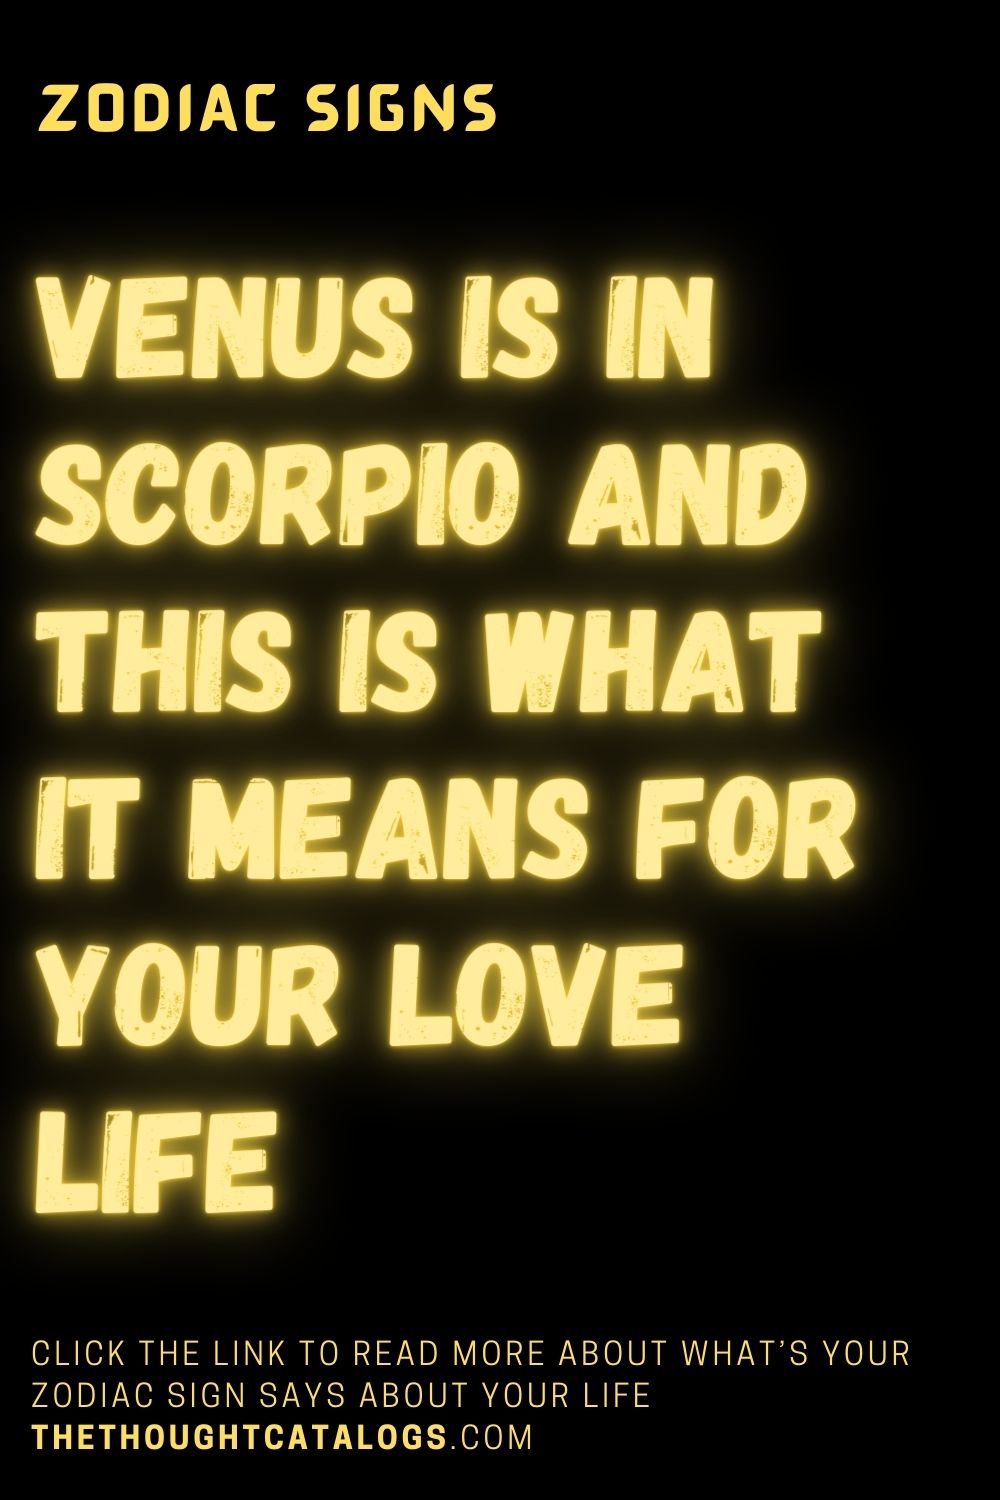 Venus Is In Scorpio And This Is What It Means For Your Love Life